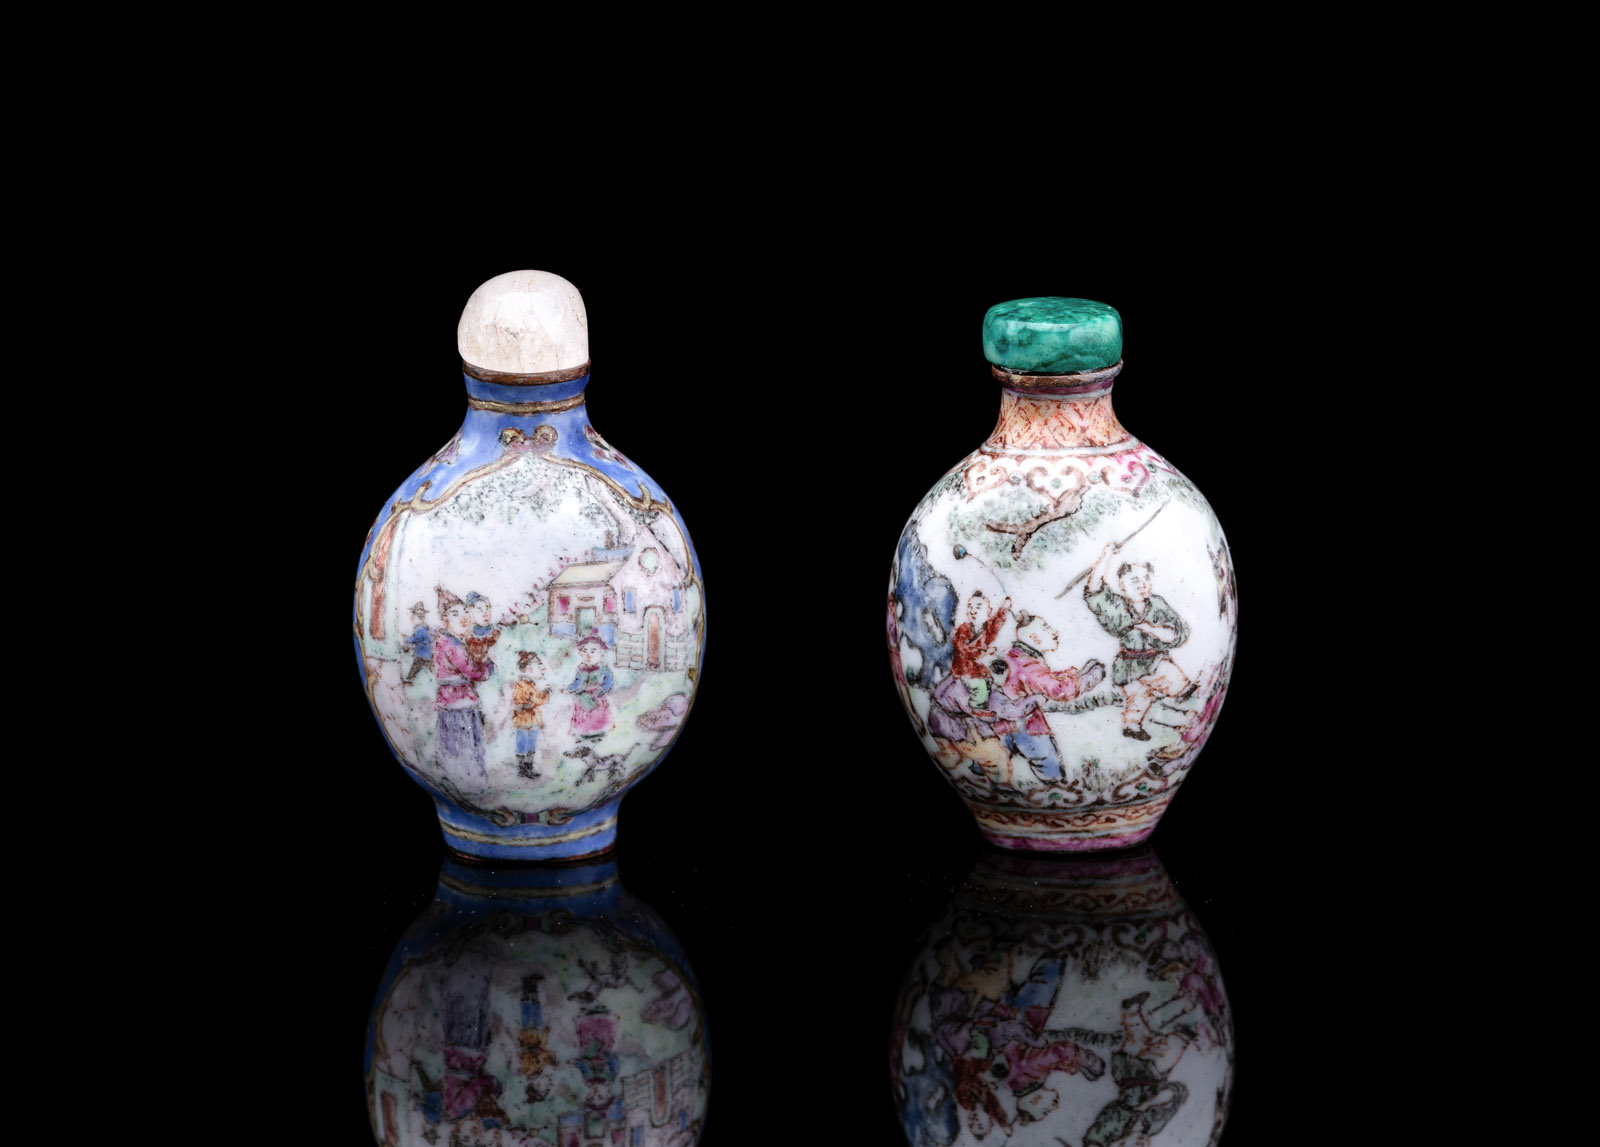 <b>TWO FINELY PAINTED ENAMEL SNUFFBOTTLES WITH PLAYING BOYS OR FIGURAL SCENES</b>